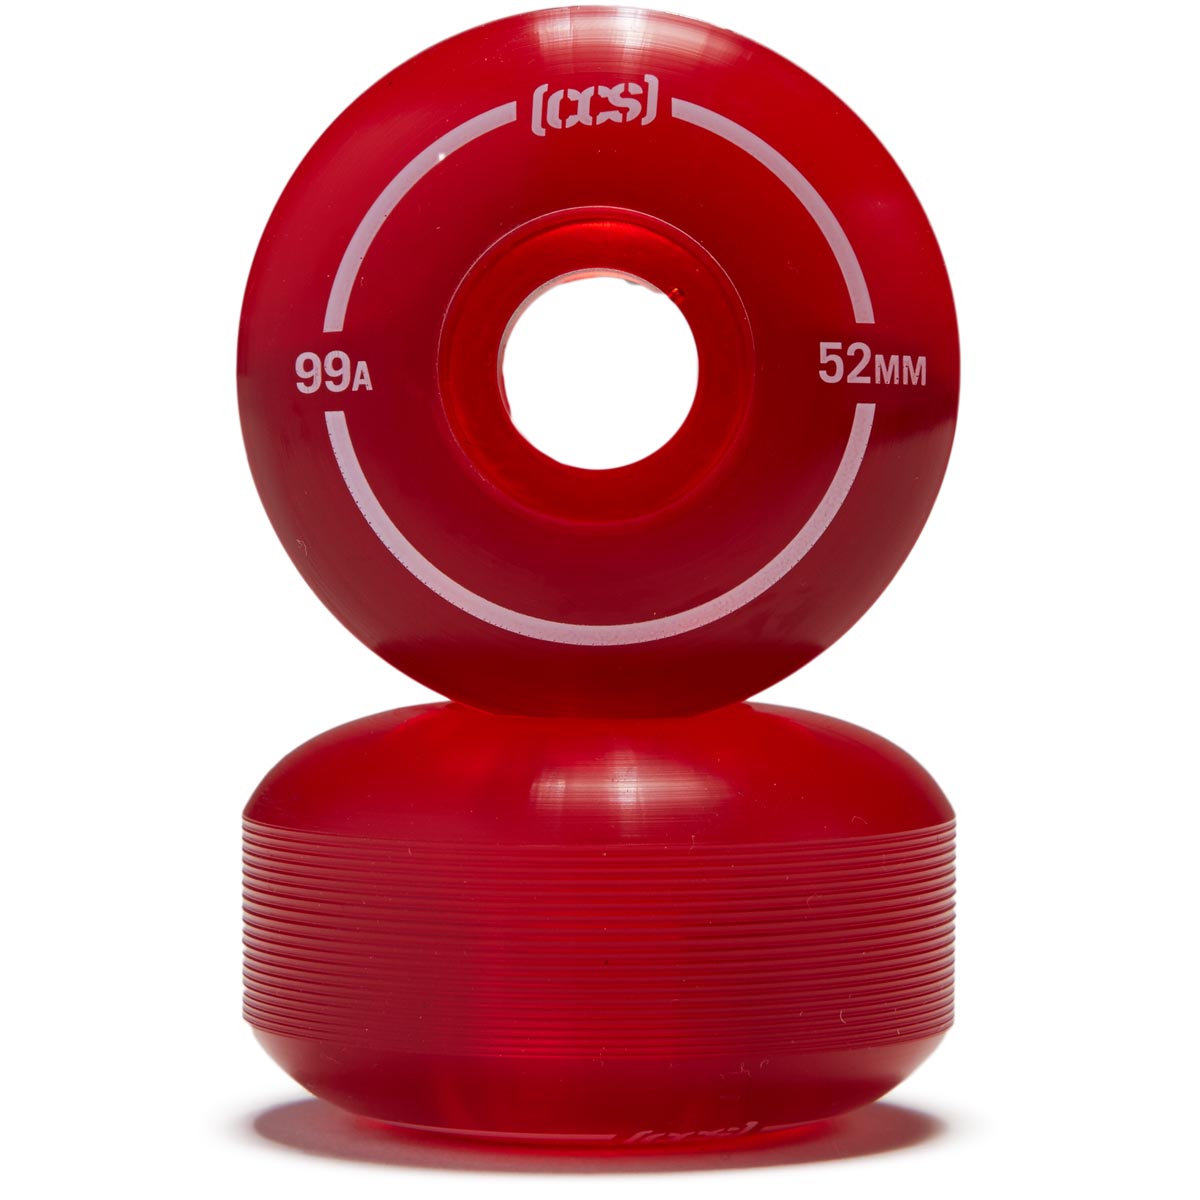 CCS Clear 99a Skateboard Wheels - Red - 52mm image 2